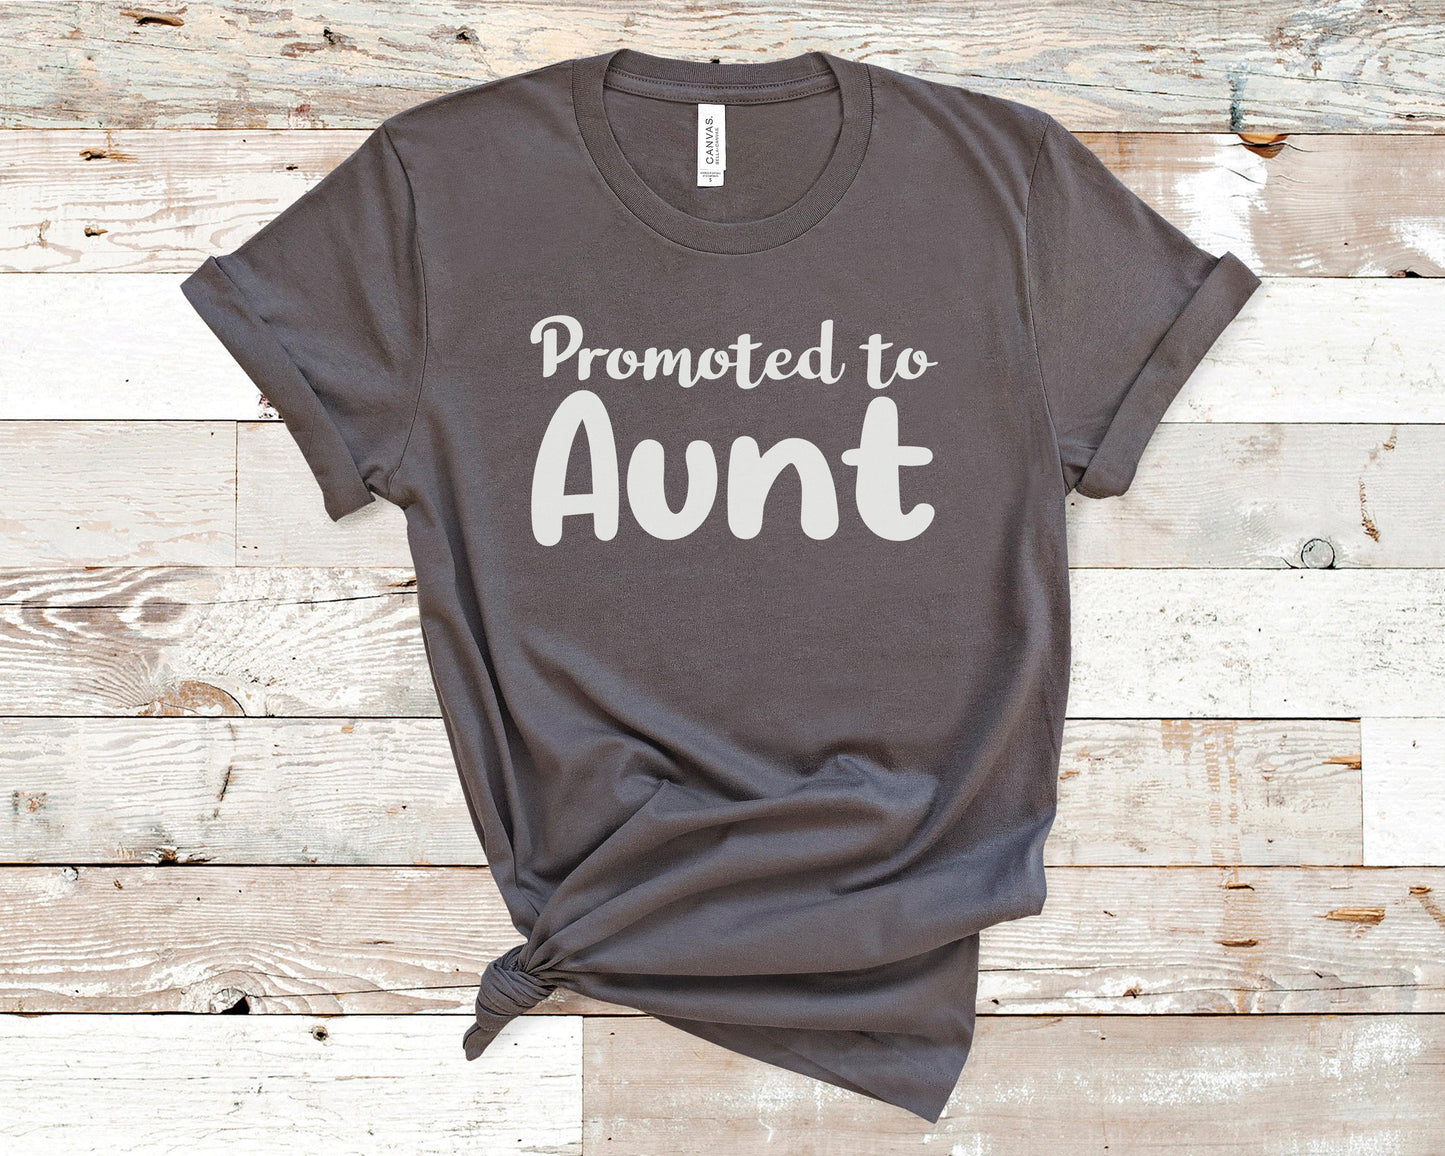 Promoted to Aunt - Pregnancy Announcement